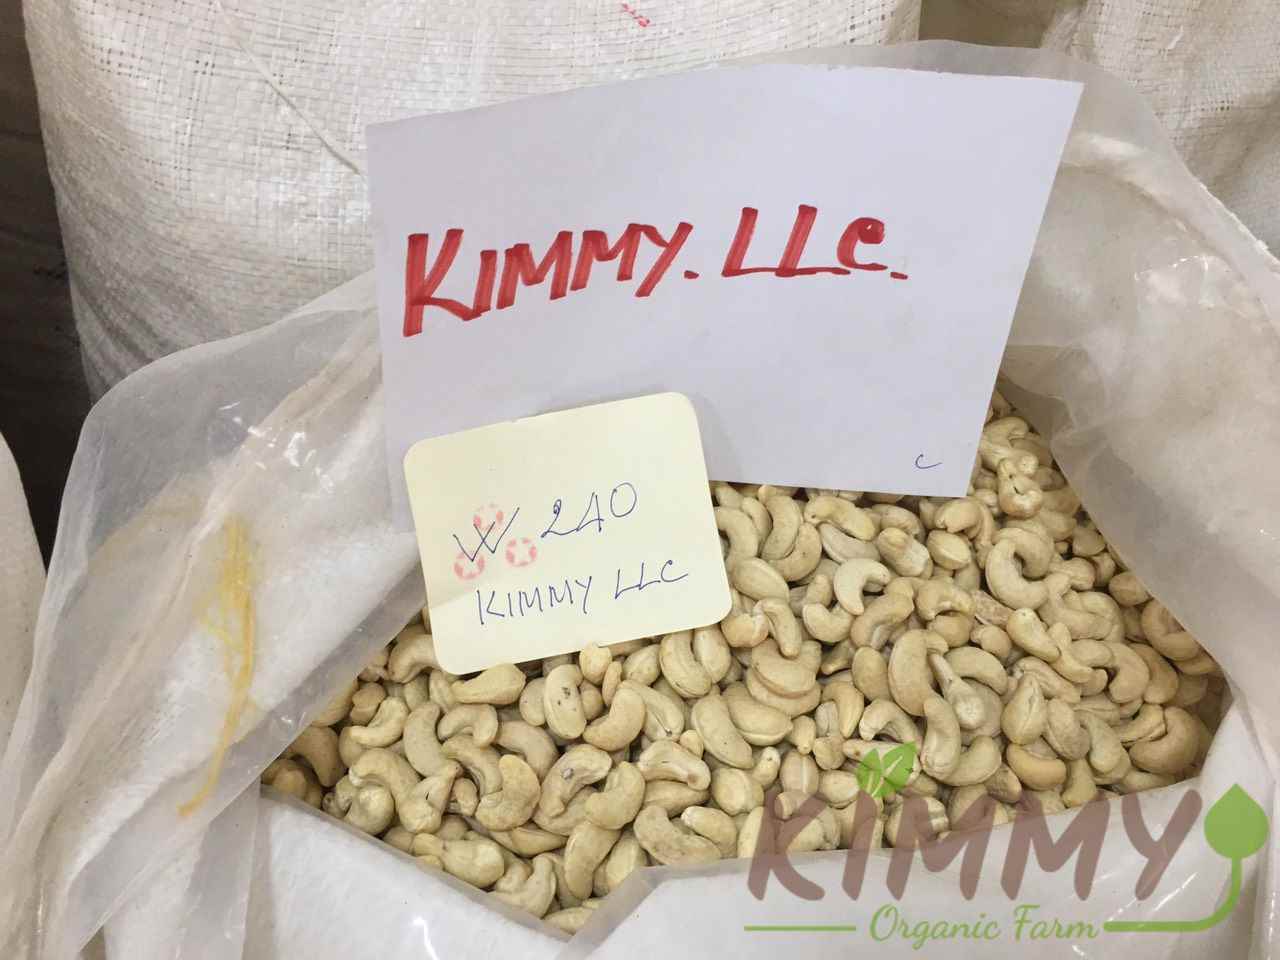 The Price of W240 & W320 Cashew From Vietnam Increasing